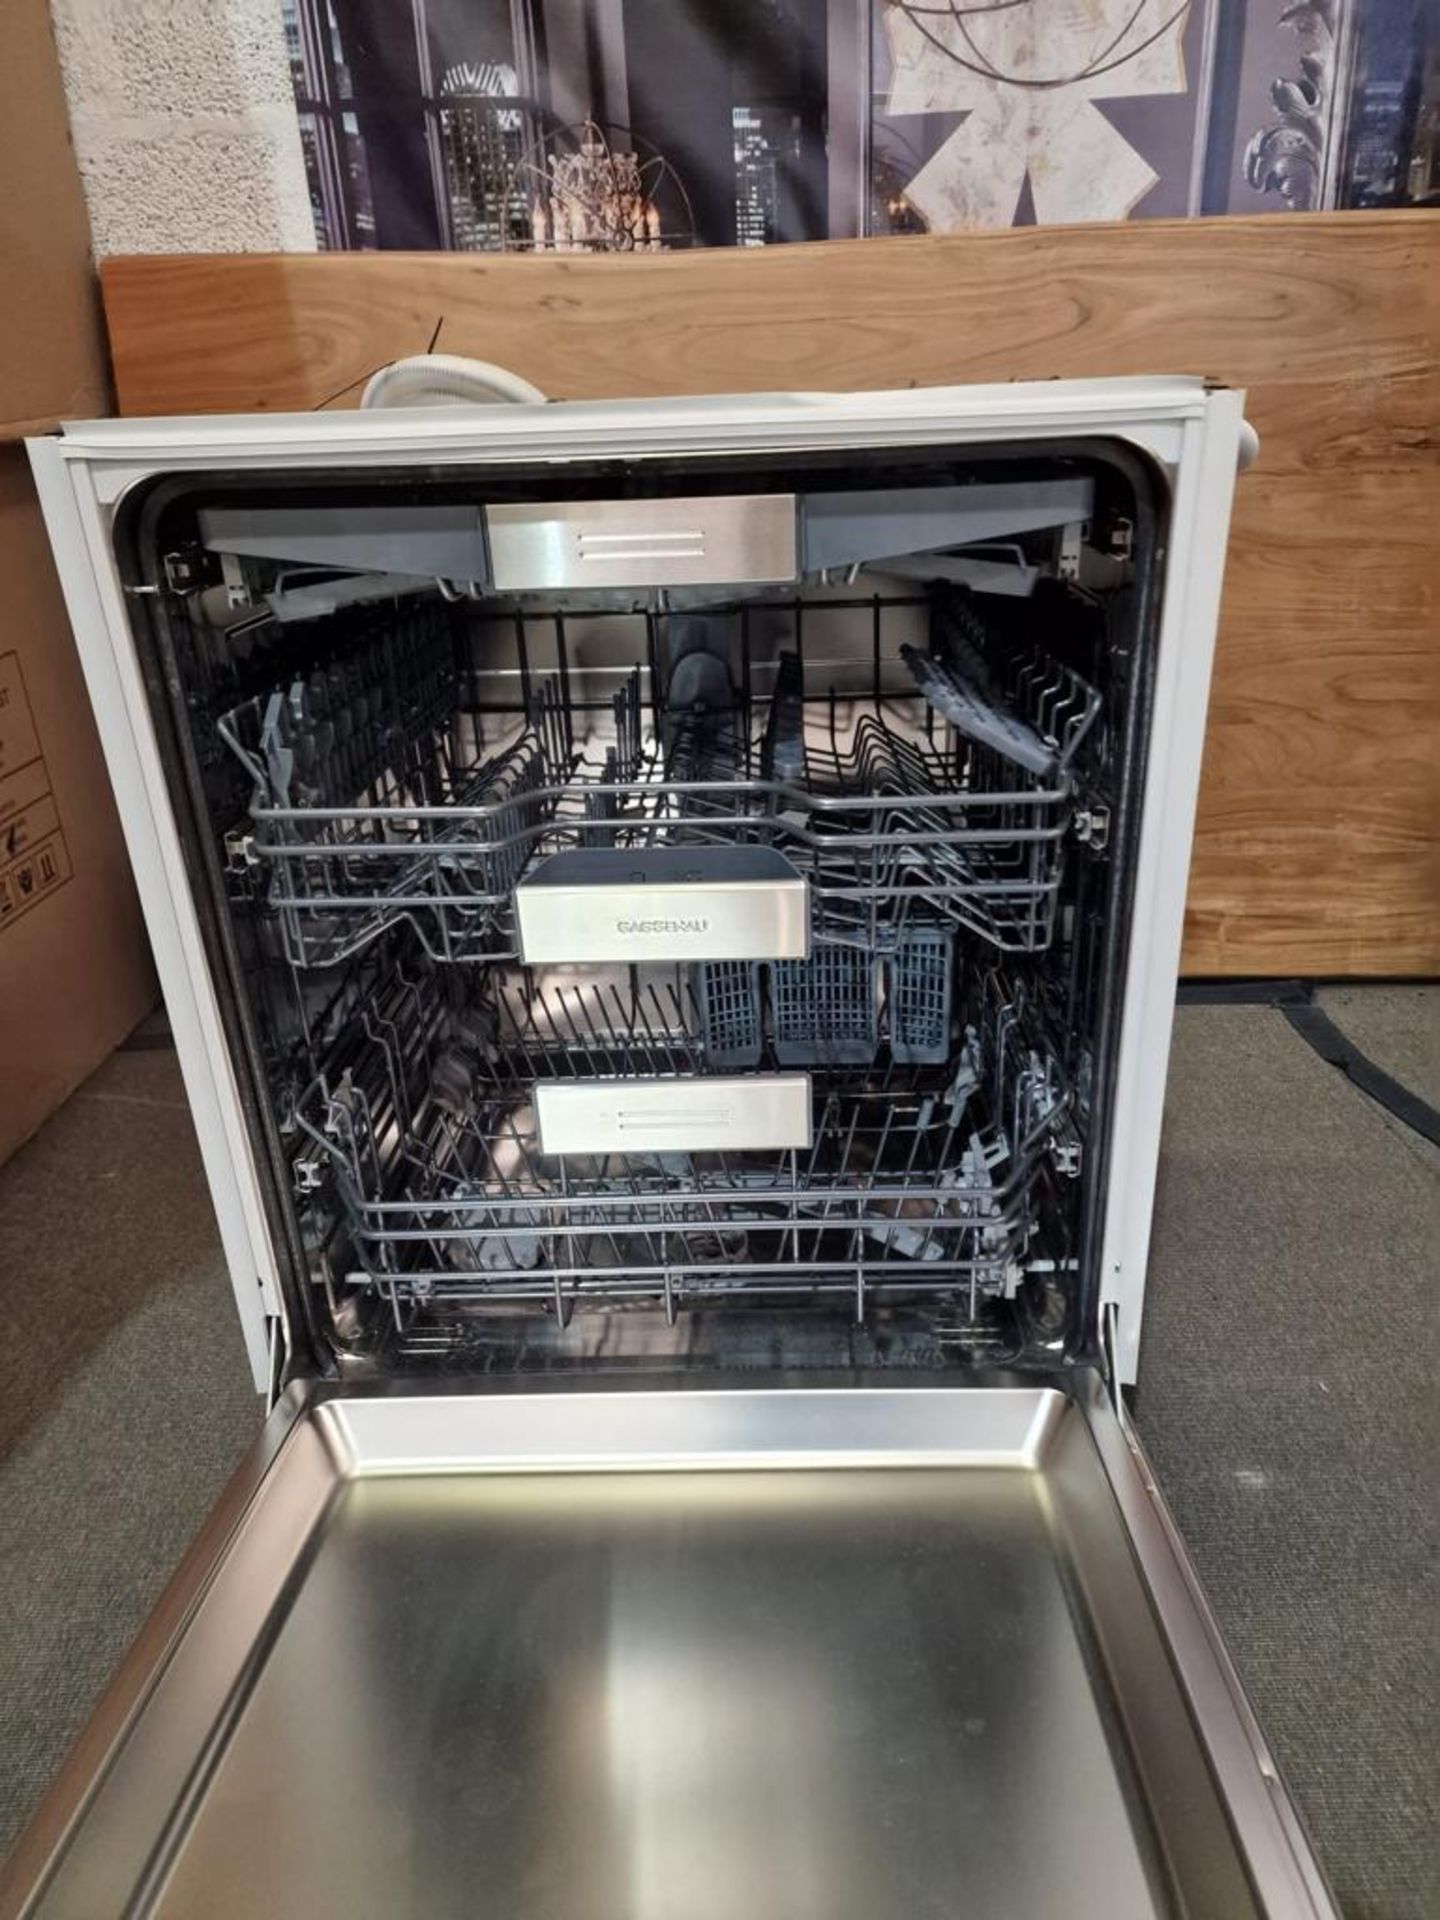 Gaggenau Hausgerate intregrated DF260163F Dishwasher 200 Series Fully Integrated With Flexible Hinge - Bild 3 aus 4